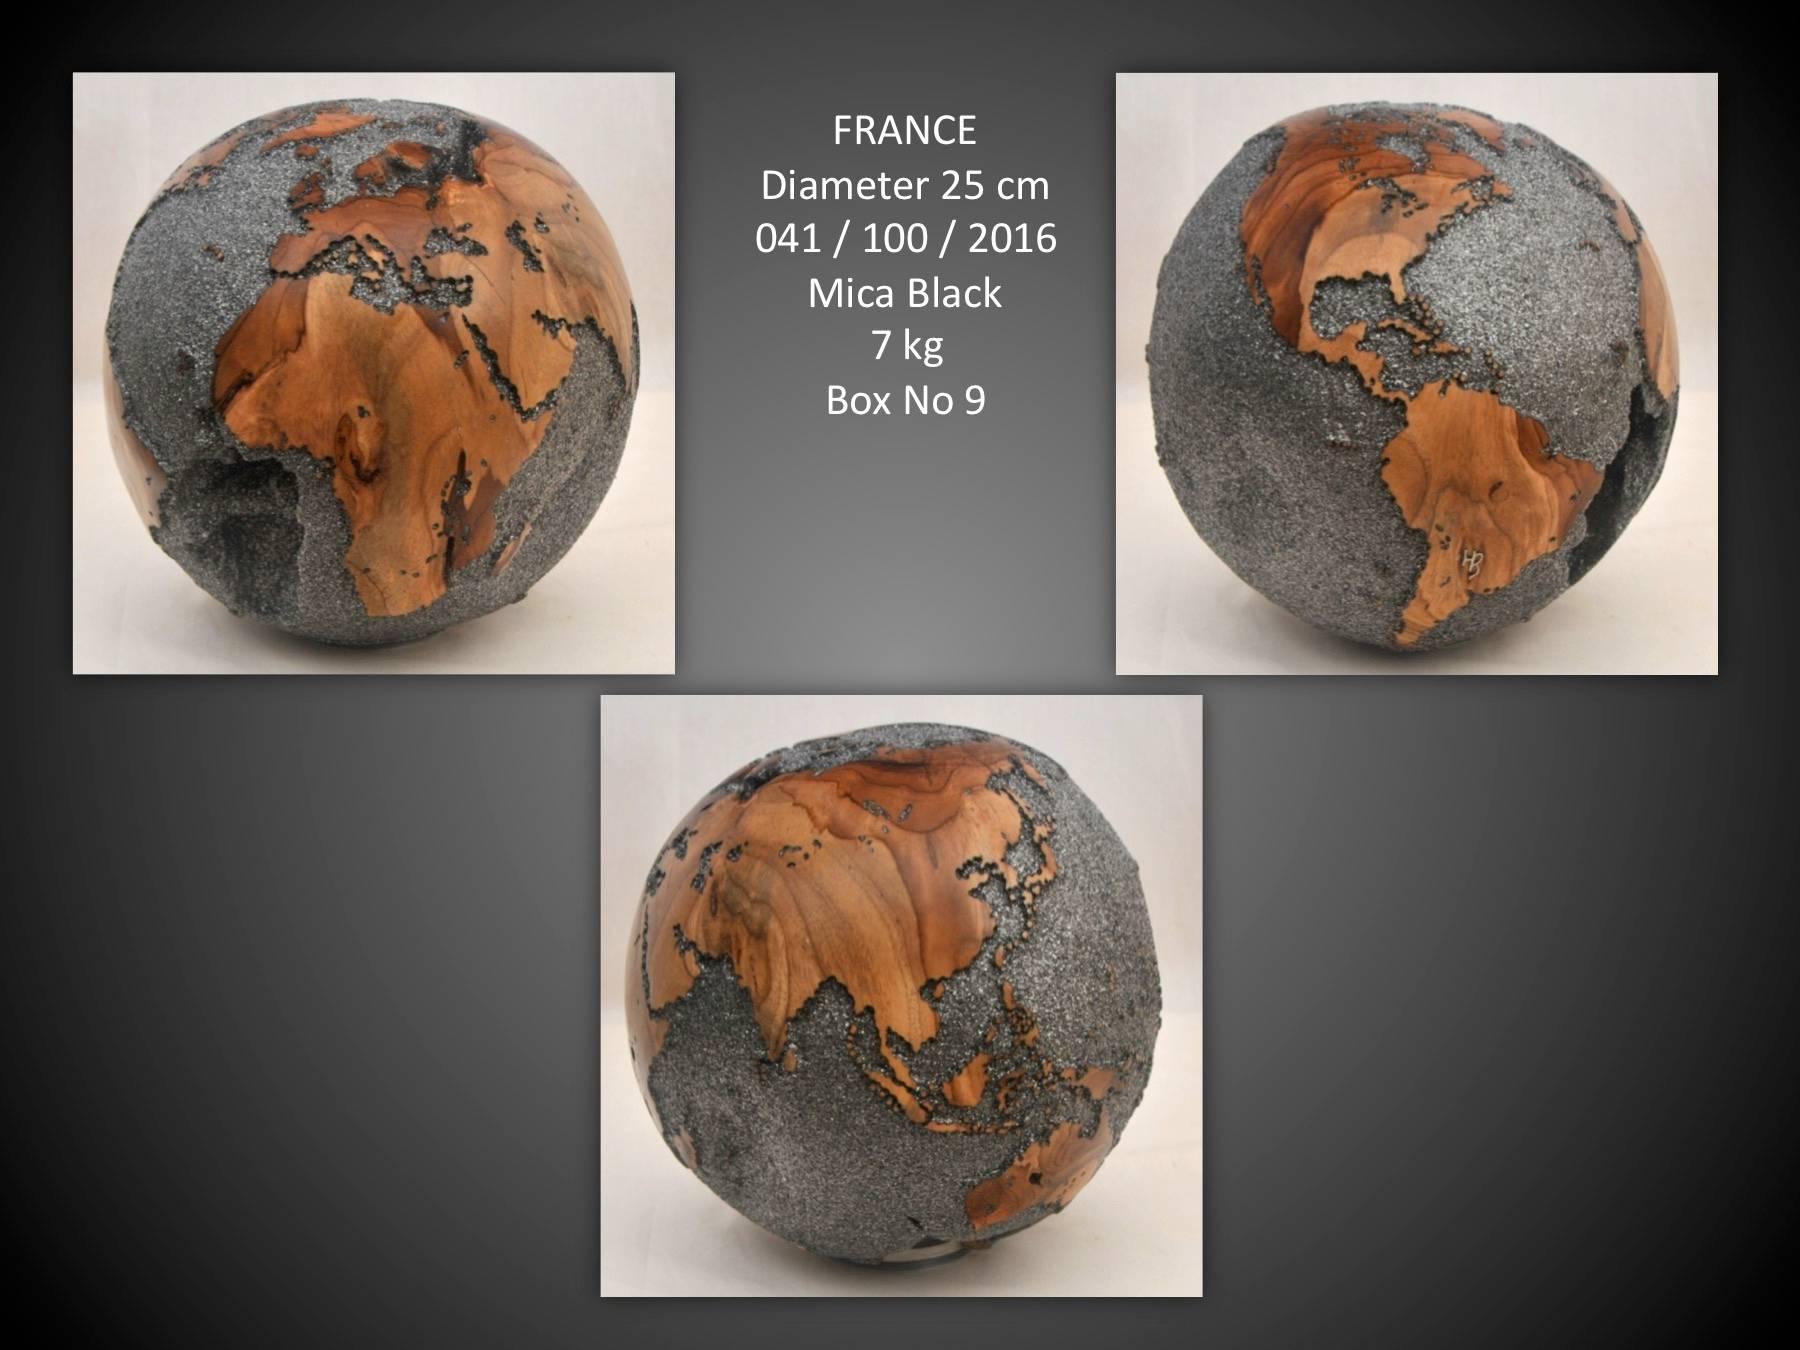 Balinese One of a kind Teak Root Globe in Black Mica with Rotative Base - 9.84 in/25 cm